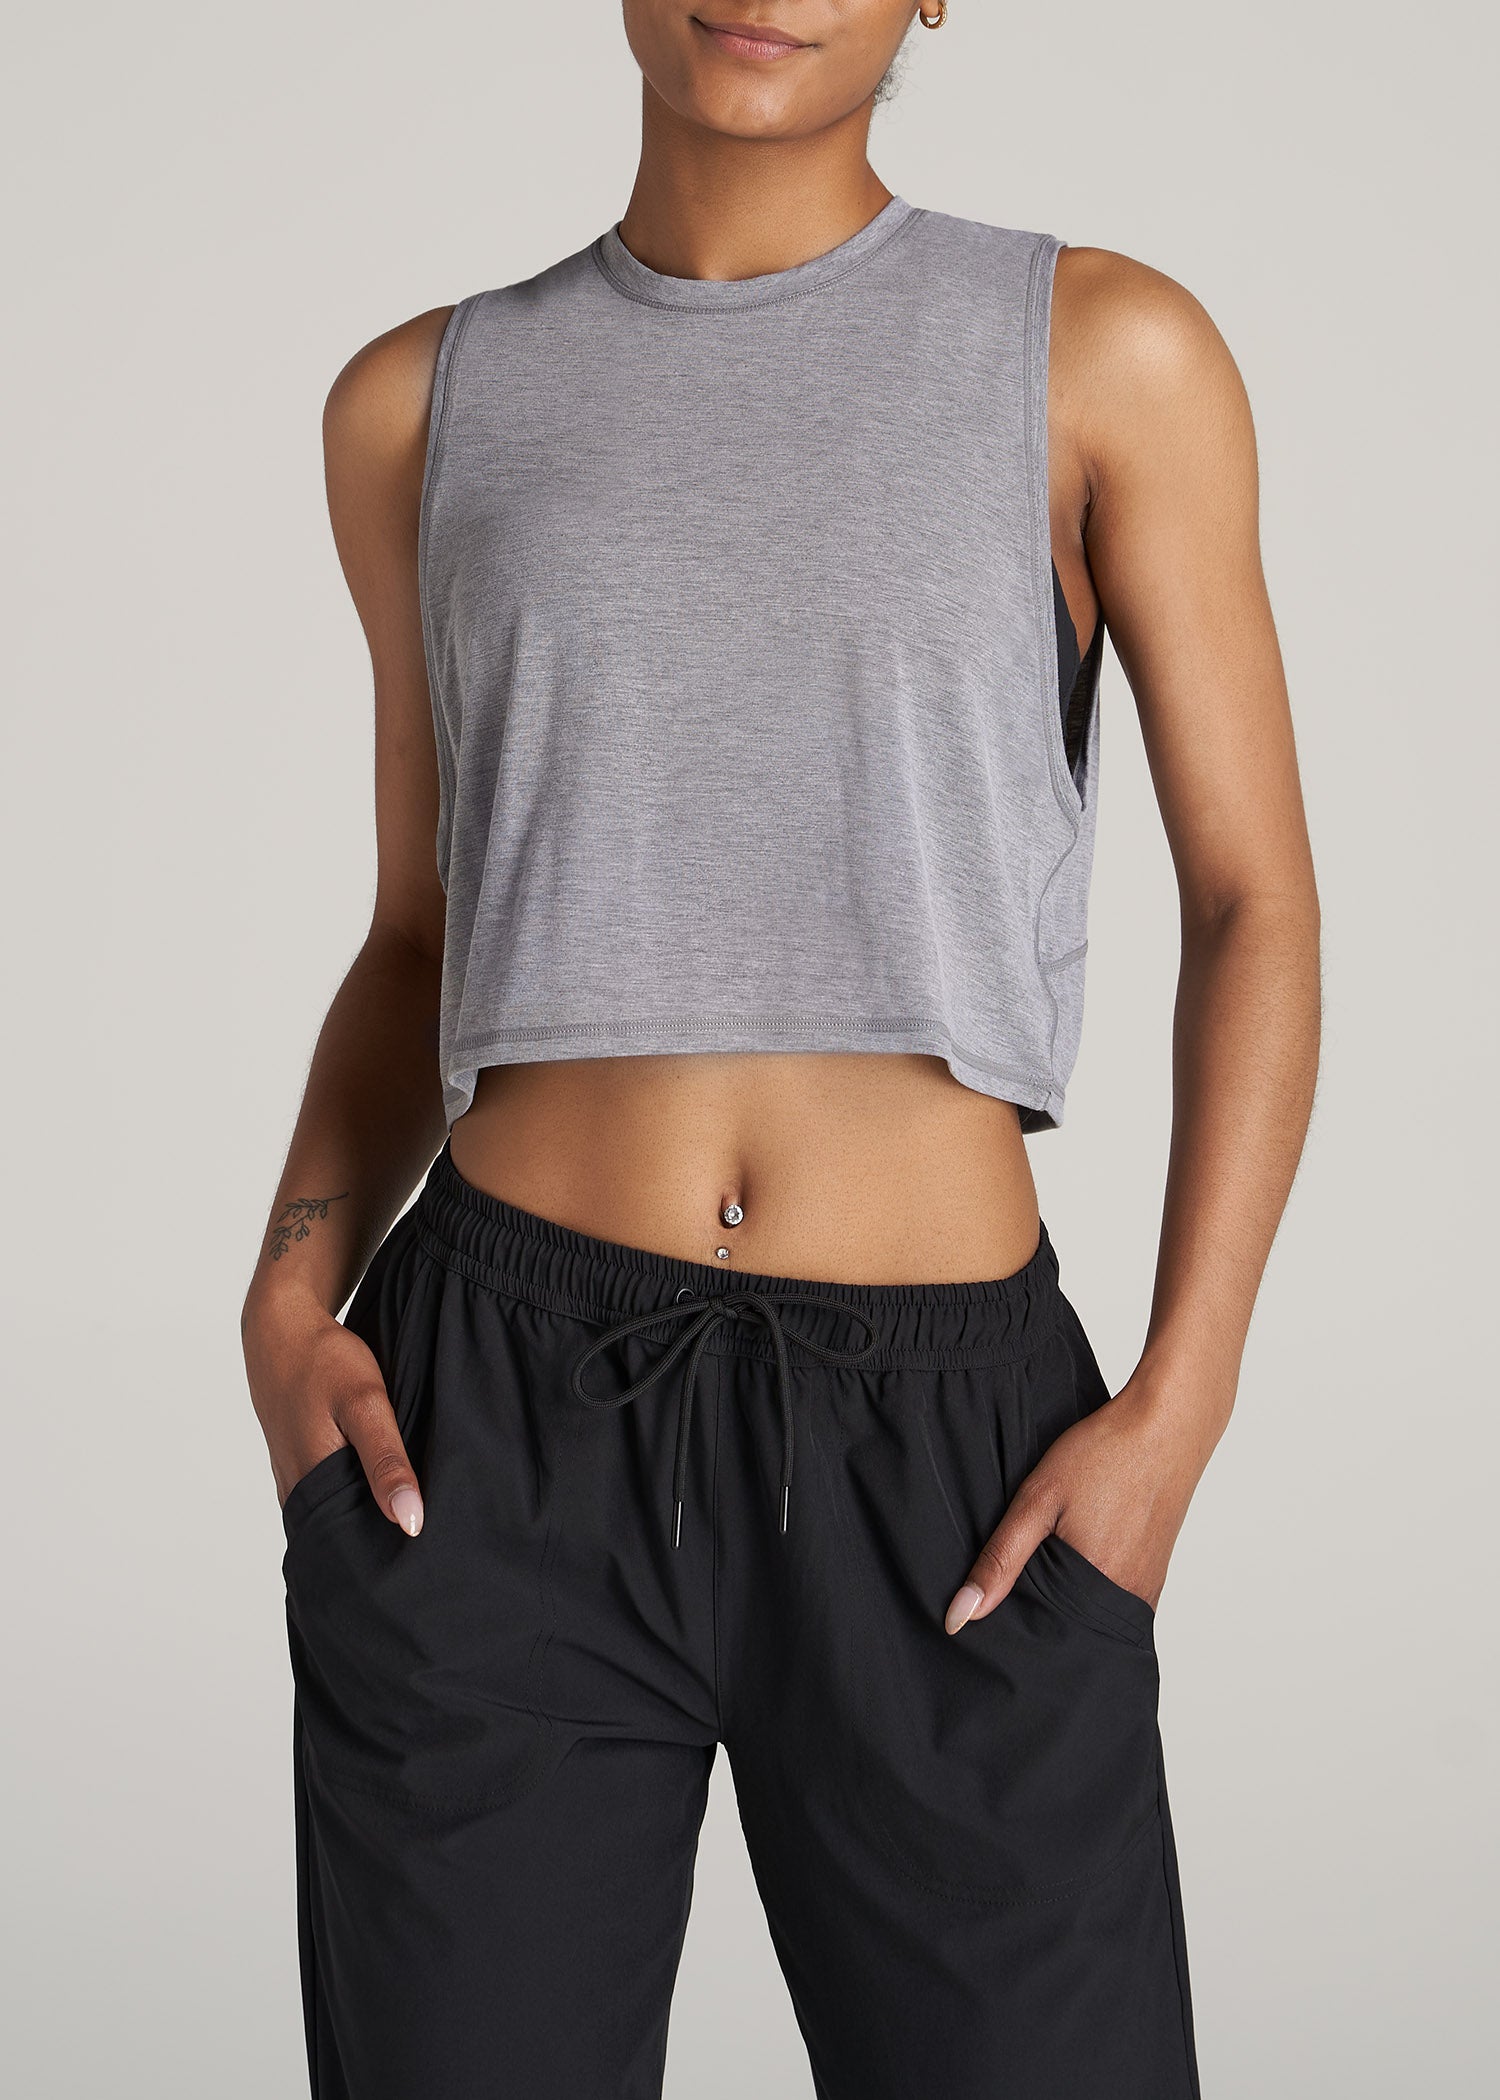 Women's Cropped Muscle Tank: Tall Cropped Muscle Tank Grey